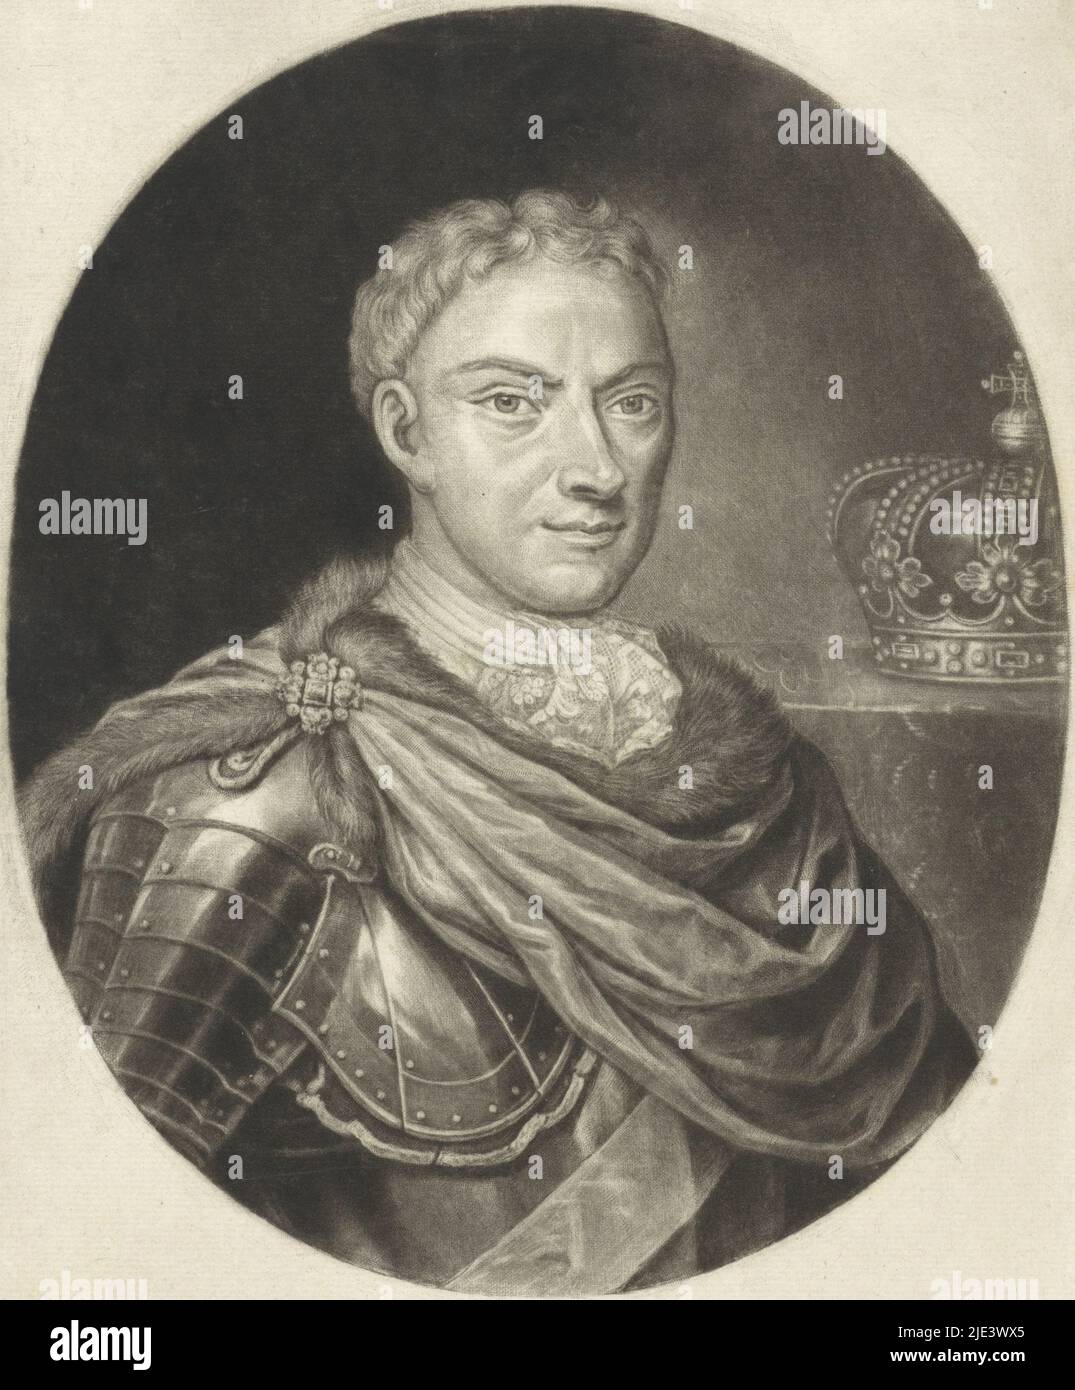 Portrait of Augustus II, King of Poland, Jacob Gole, 1694 - 1724, Augustus II, Elector of Saxony and King of Poland, nicknamed 'The Strong One. In Saxony he was called Frederick August I. He wears armor, beside him the king's crown., print maker: Jacob Gole, (mentioned on object), publisher: Jacob Gole, (mentioned on object), Amsterdam, 1694 - 1724, paper, engraving, h 266 mm × w 178 mm Stock Photo